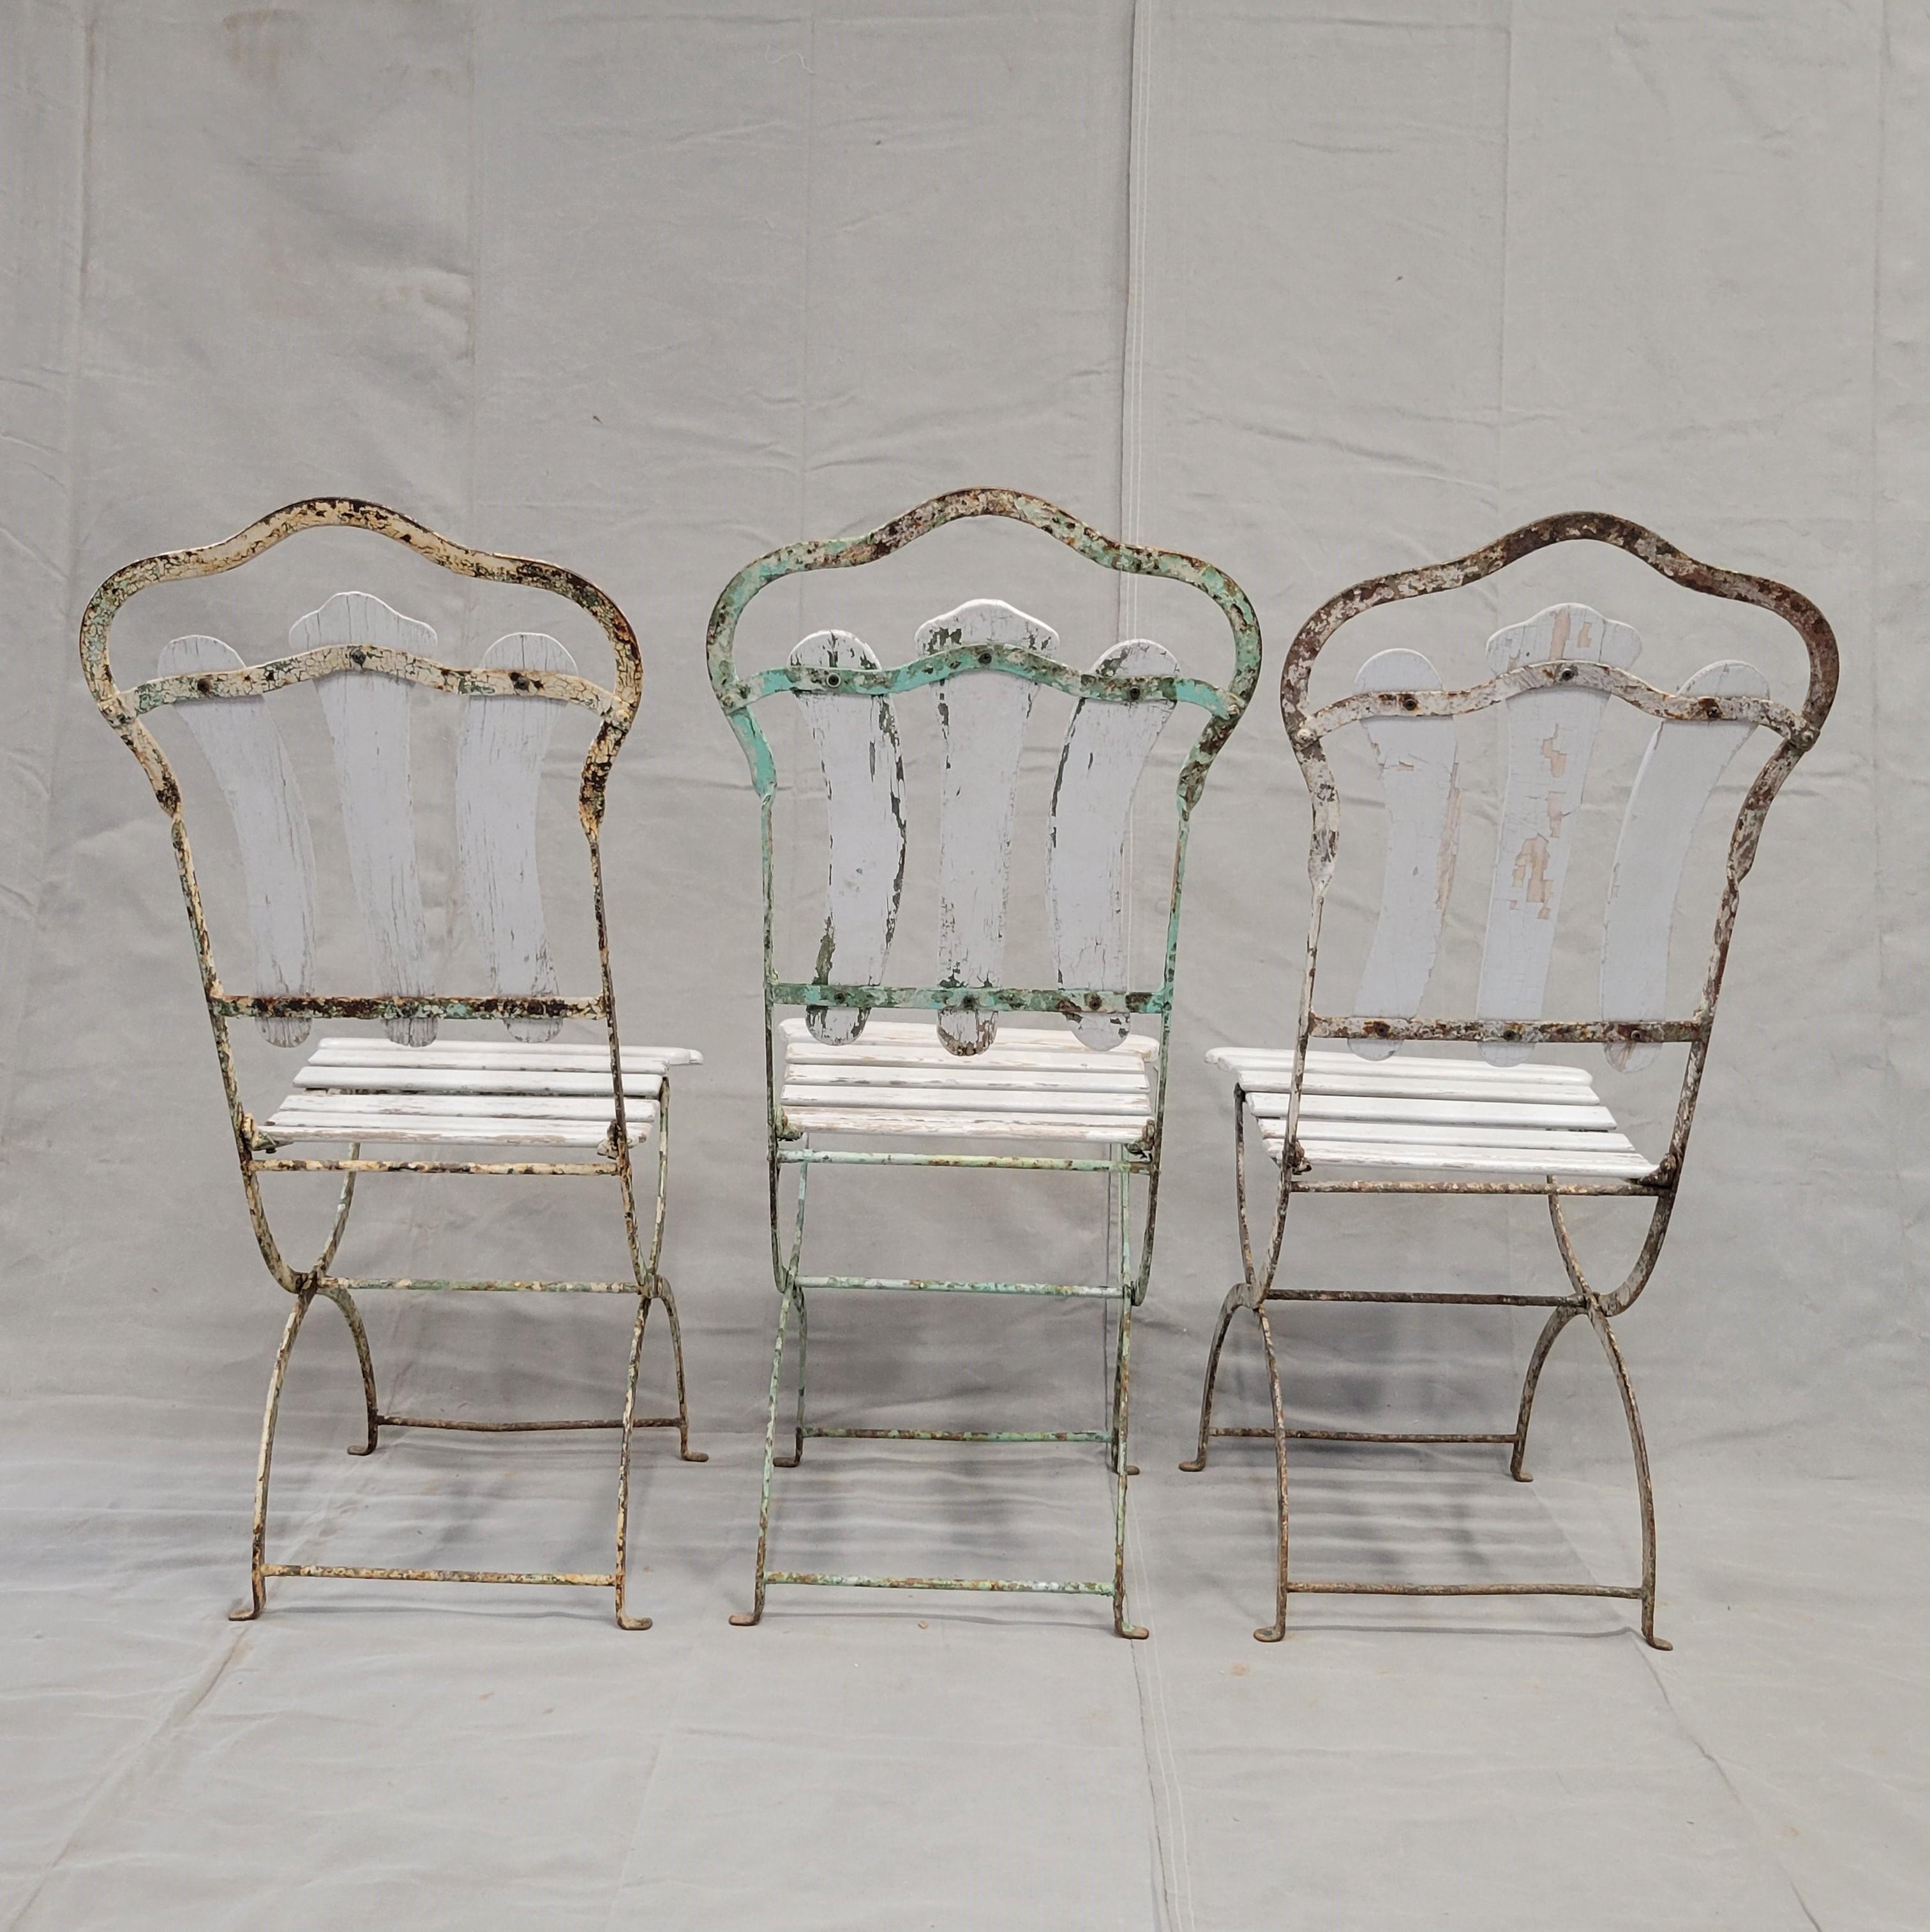 20th Century Antique French Iron and Wood Folding Bistro Garden Chairs - Set of 3 For Sale